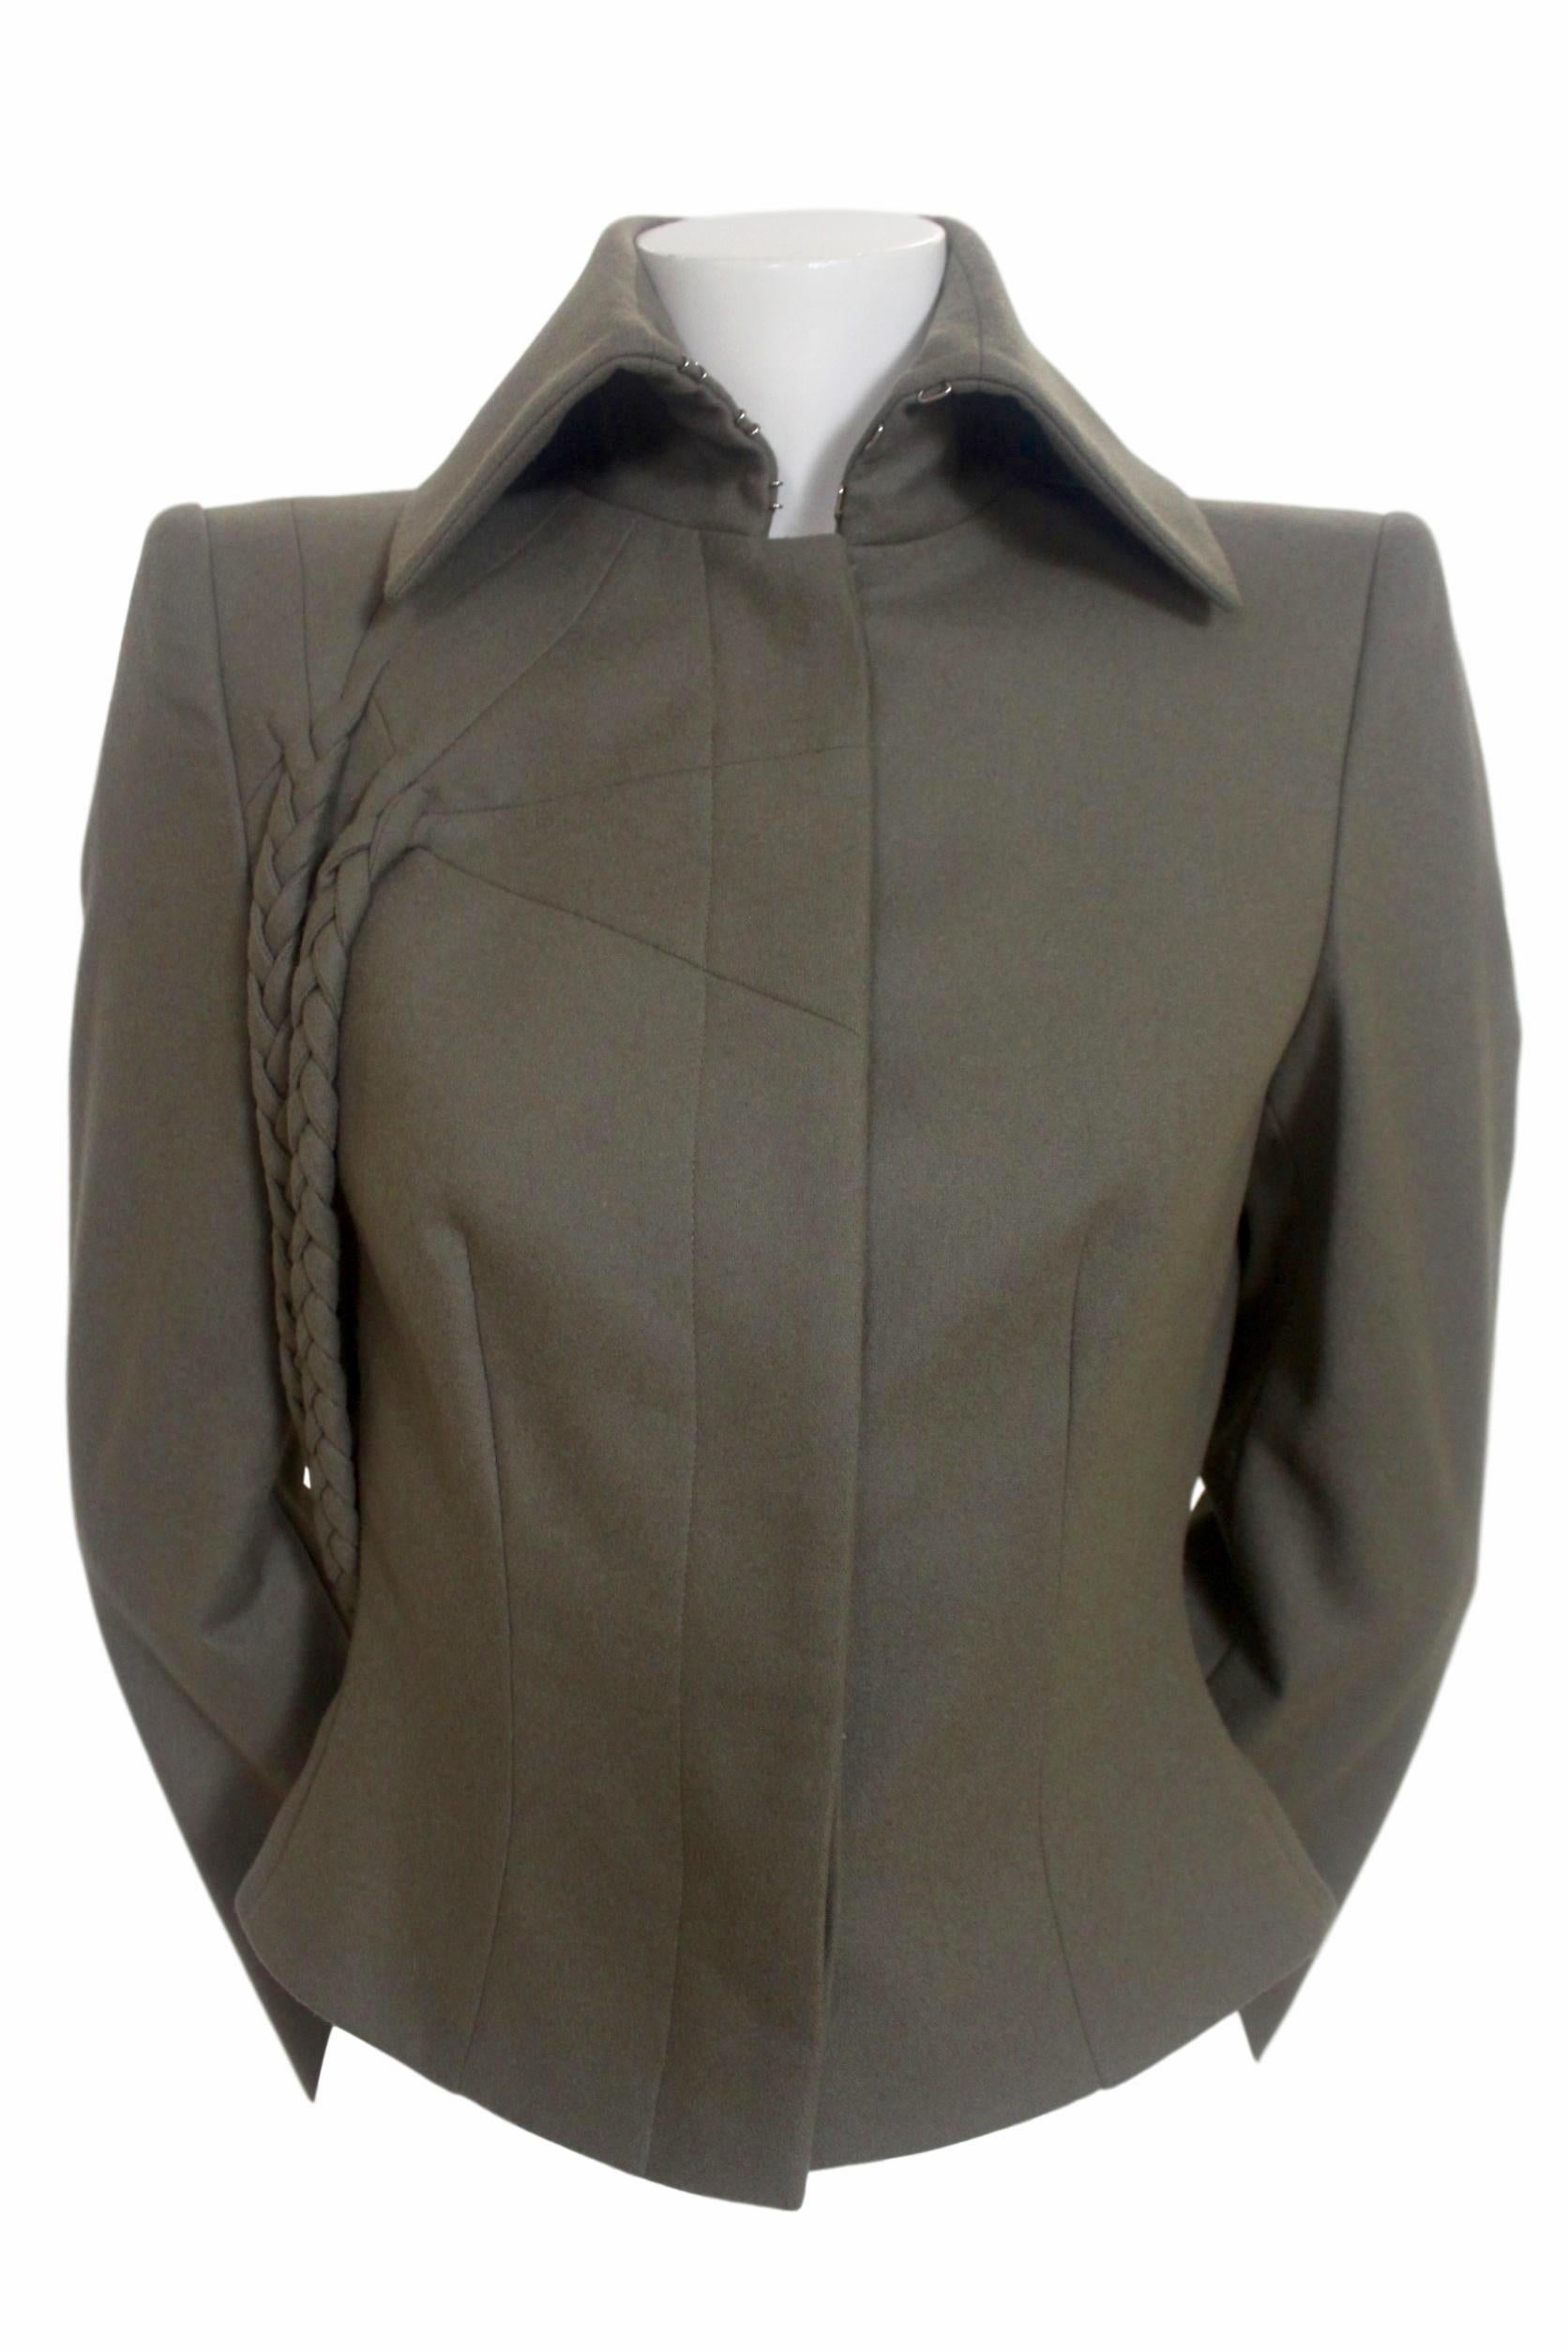 Alexander McQueen Fall/Winter 2001 Military Braid Jacket New with Labels In New Condition For Sale In Bath, GB